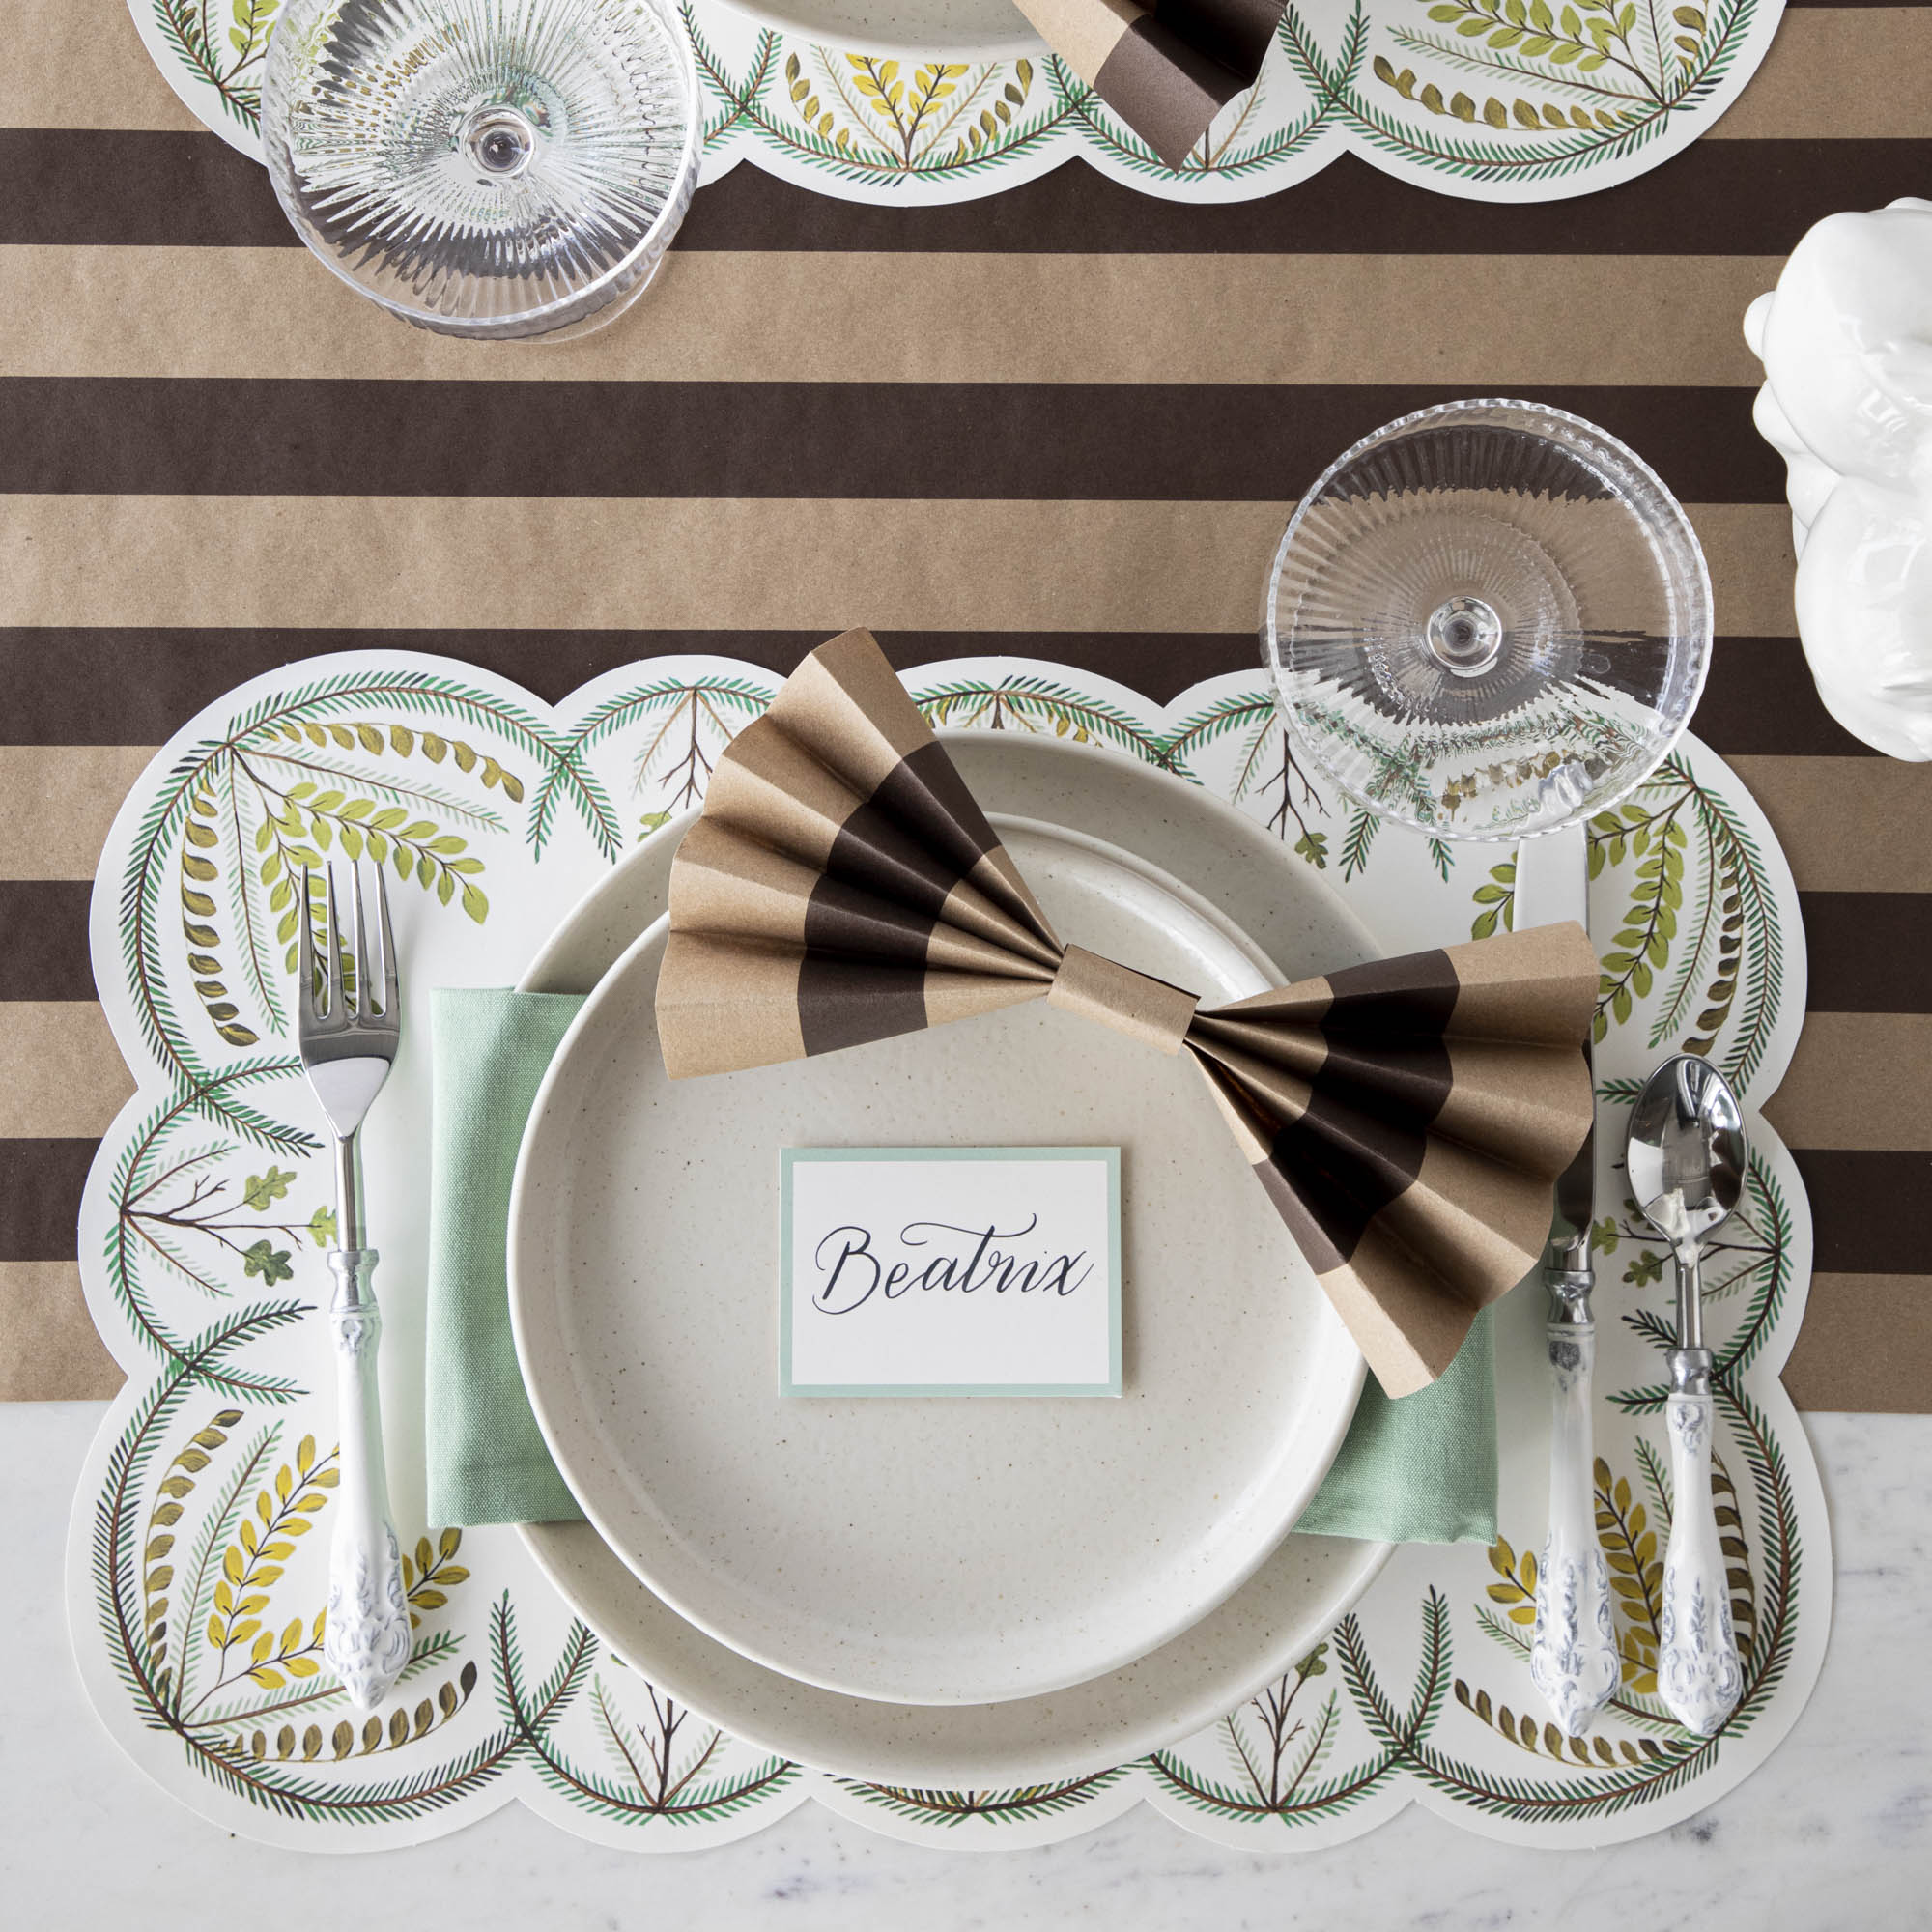 The Kraft Brown Classic Stripe Runner under an elegant table setting, plates adorned with crafted bows made from cut pieces of the runner, from above.